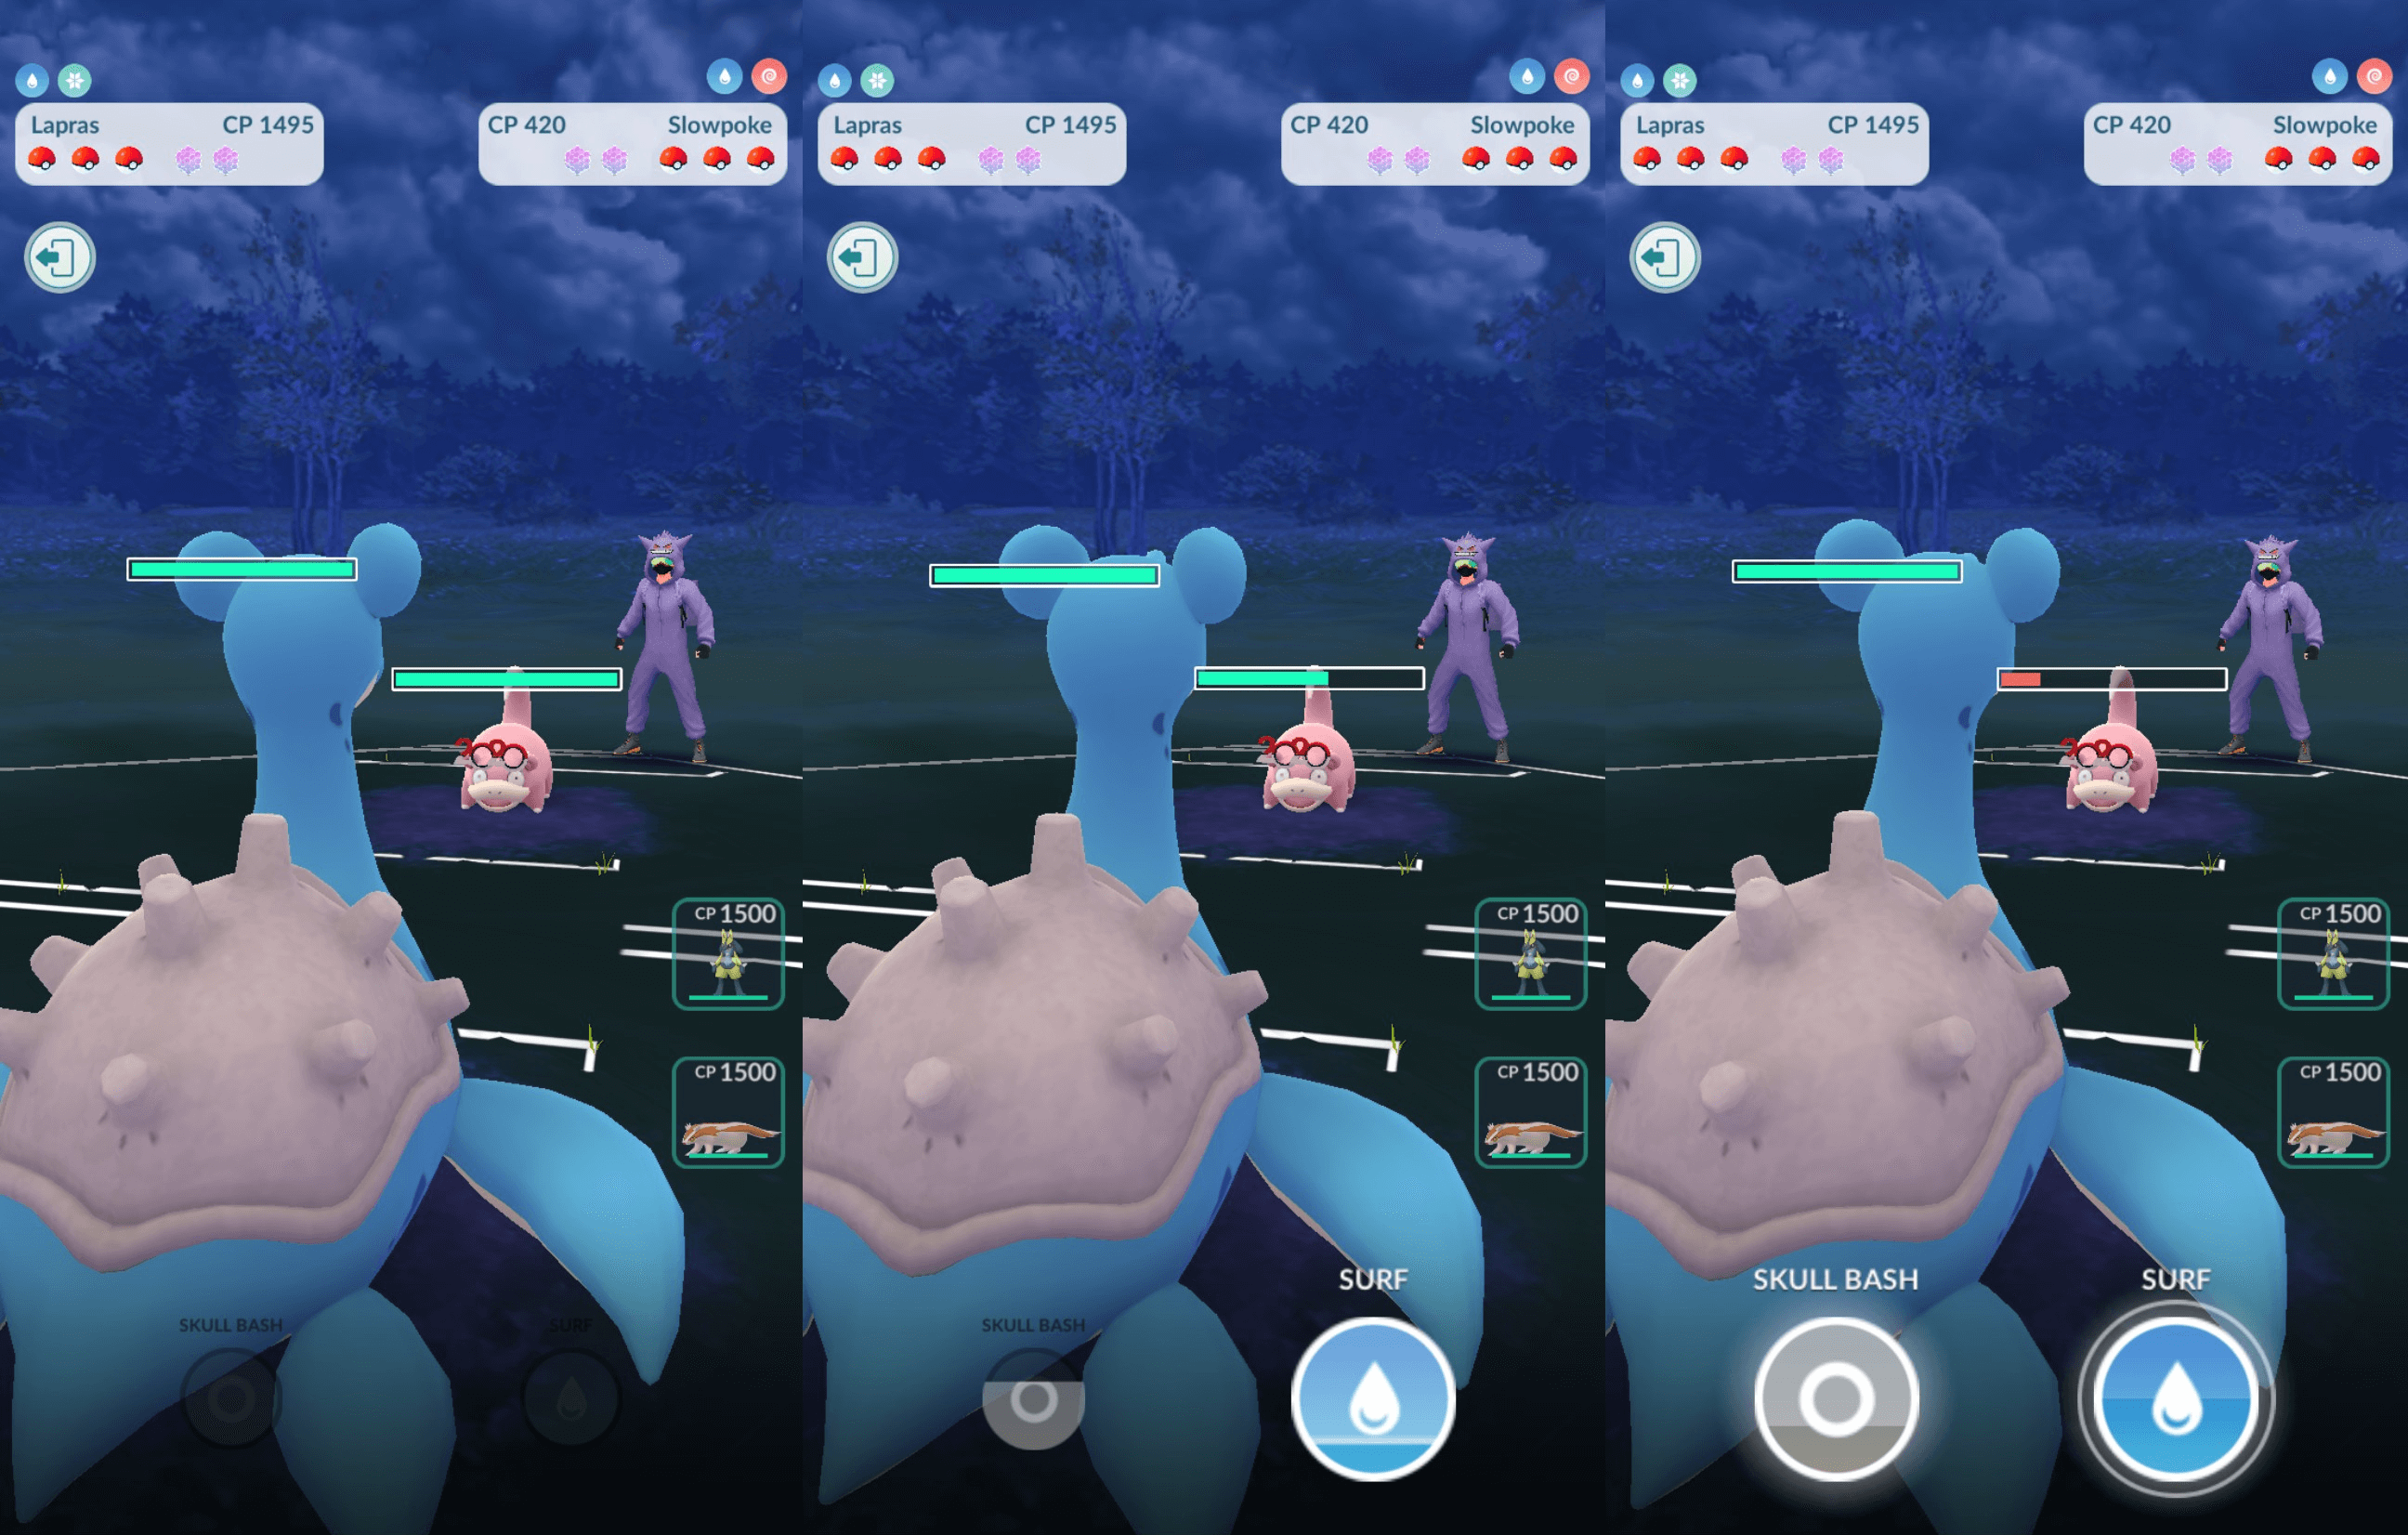 Lapras vs Slowpoke, shown with 3 different amounts of energy stored.